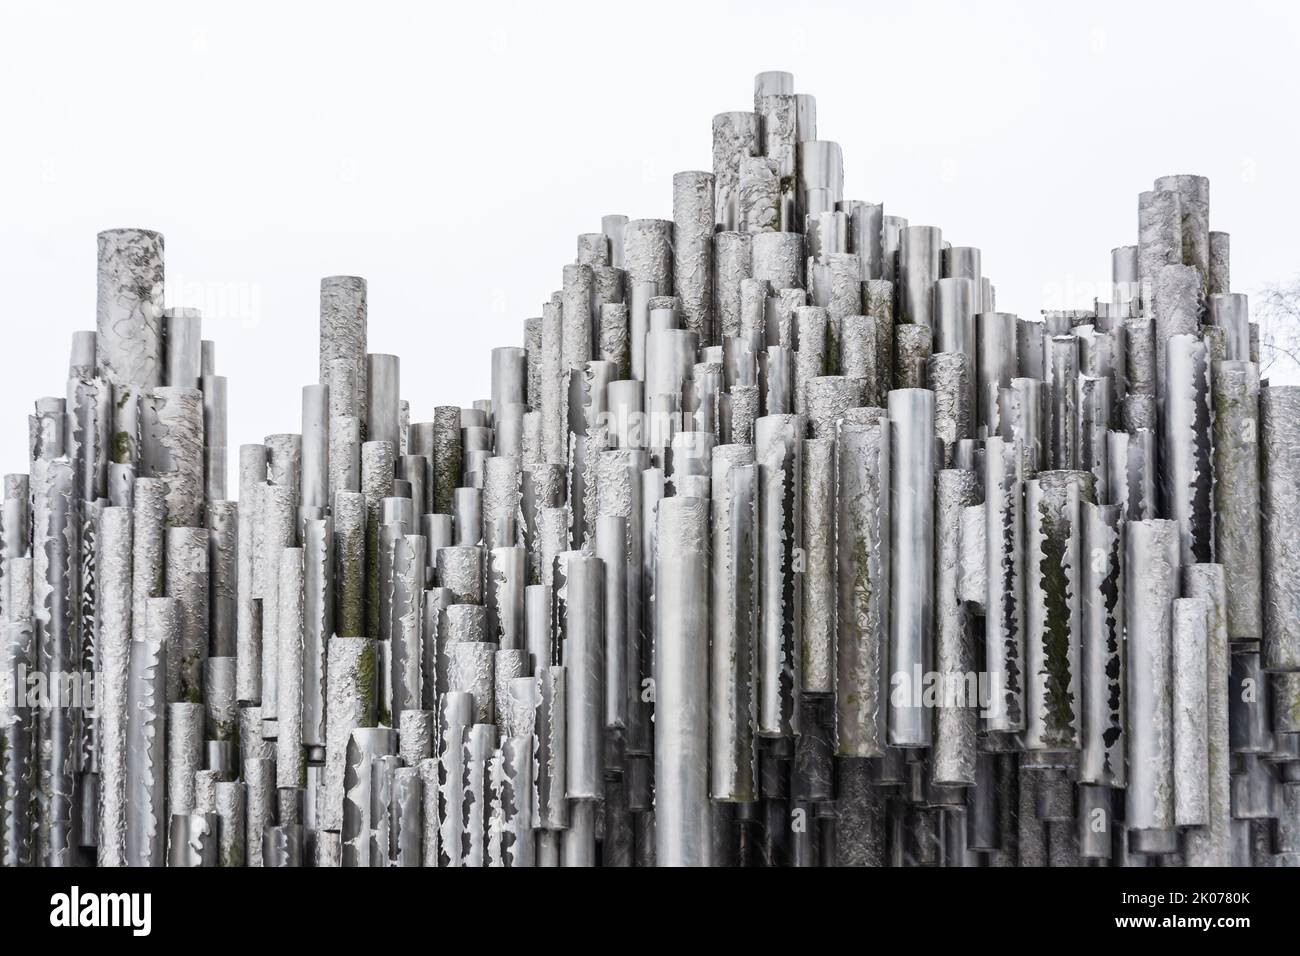 Sibelius monument titled Passio Musicae by Eila Hiltunen at Sibelius park in Helsinki Finland Stock Photo